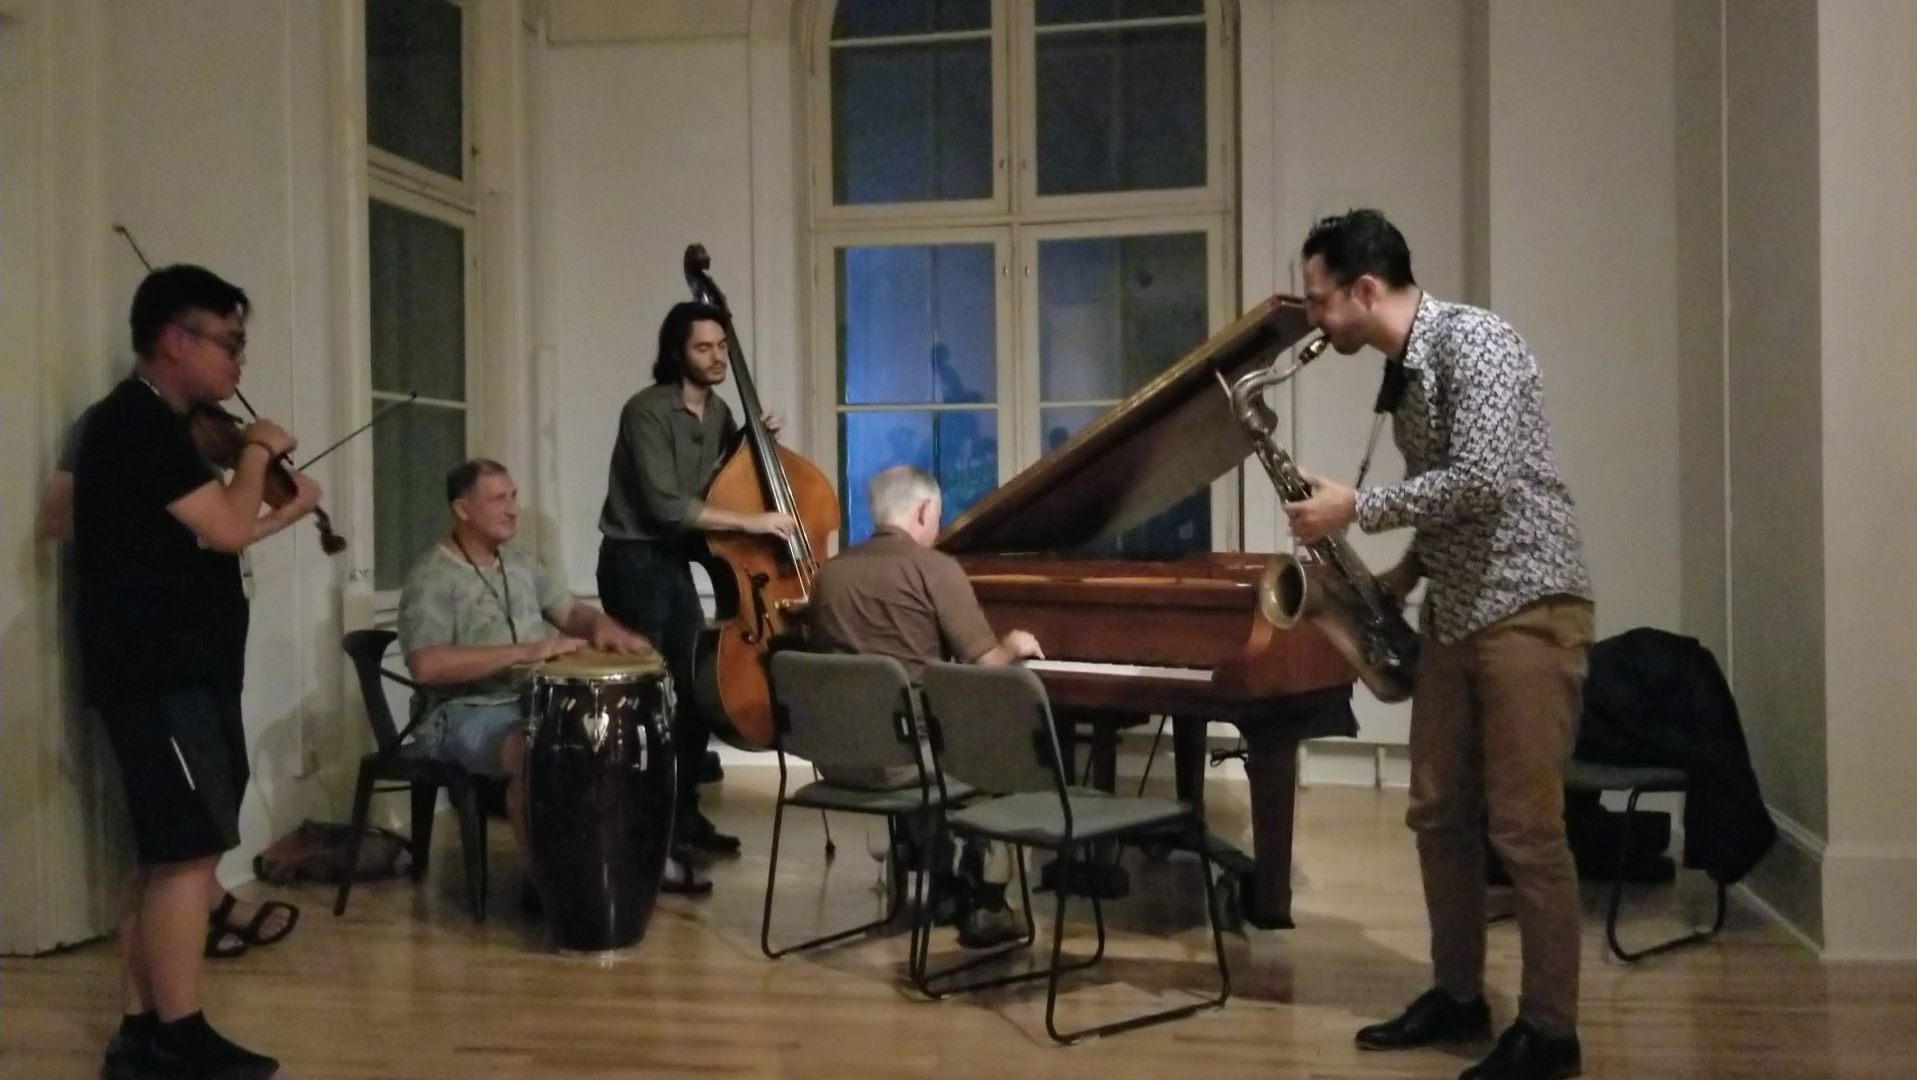 An impromptu jam session involving VCFA students and faculty (including Andy Jaffe at the piano) as well as visiting musicians (including violinist Fung Chern Hwei)